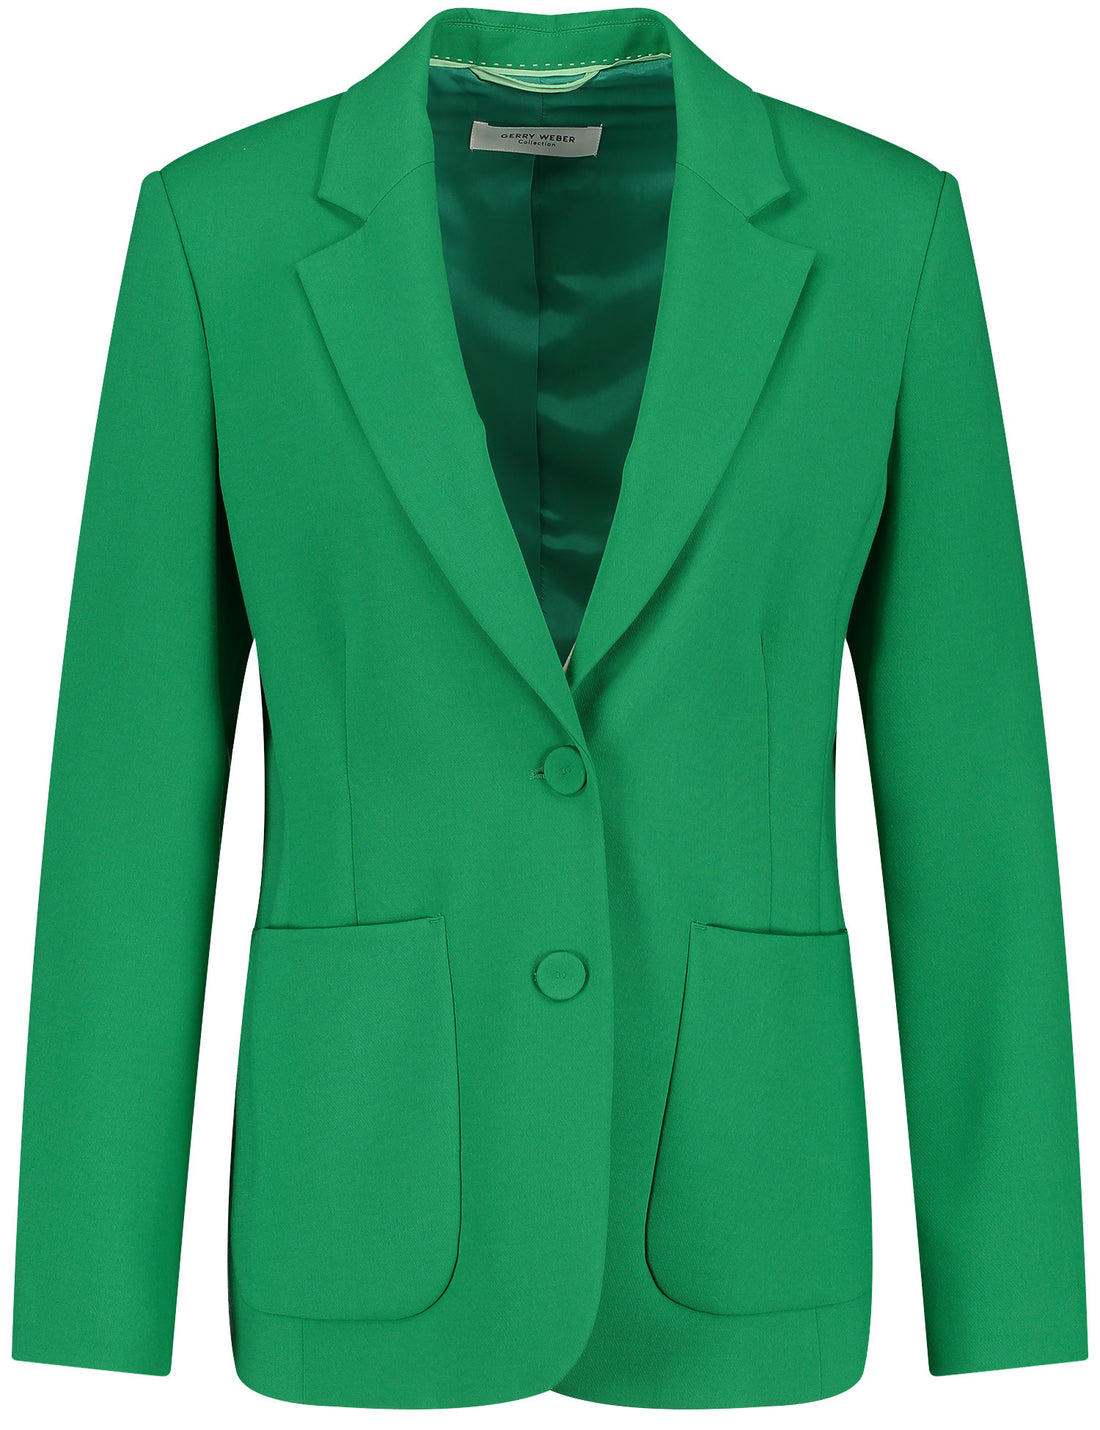 Blazer With Stretch For Comfort